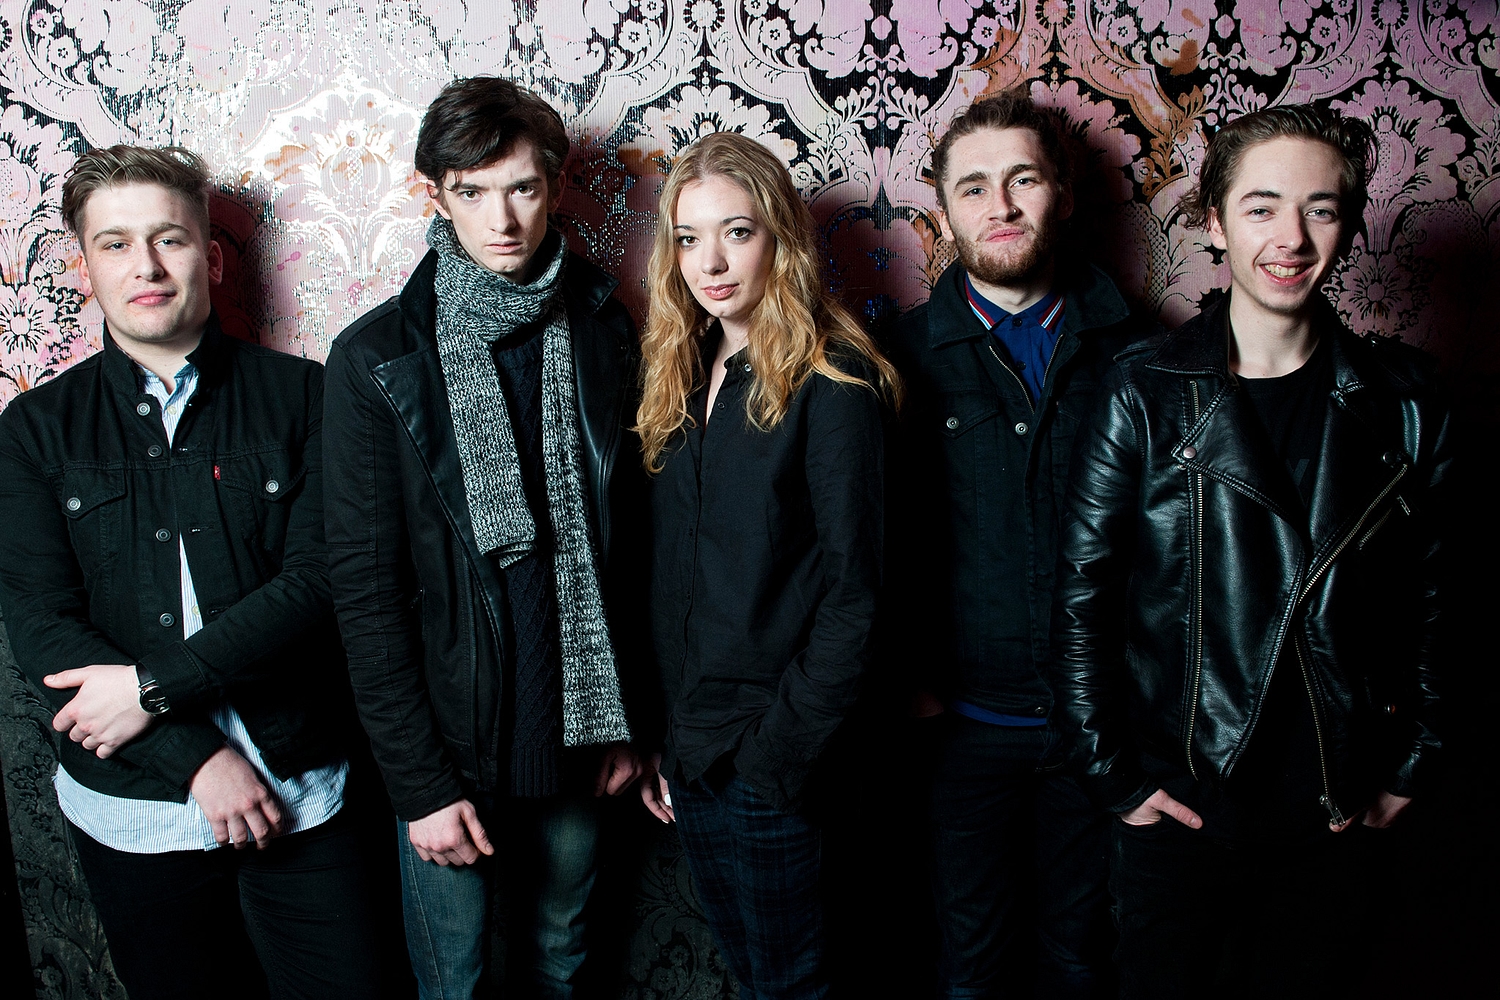 Marmozets: “It's something we've all dreamt about for years”